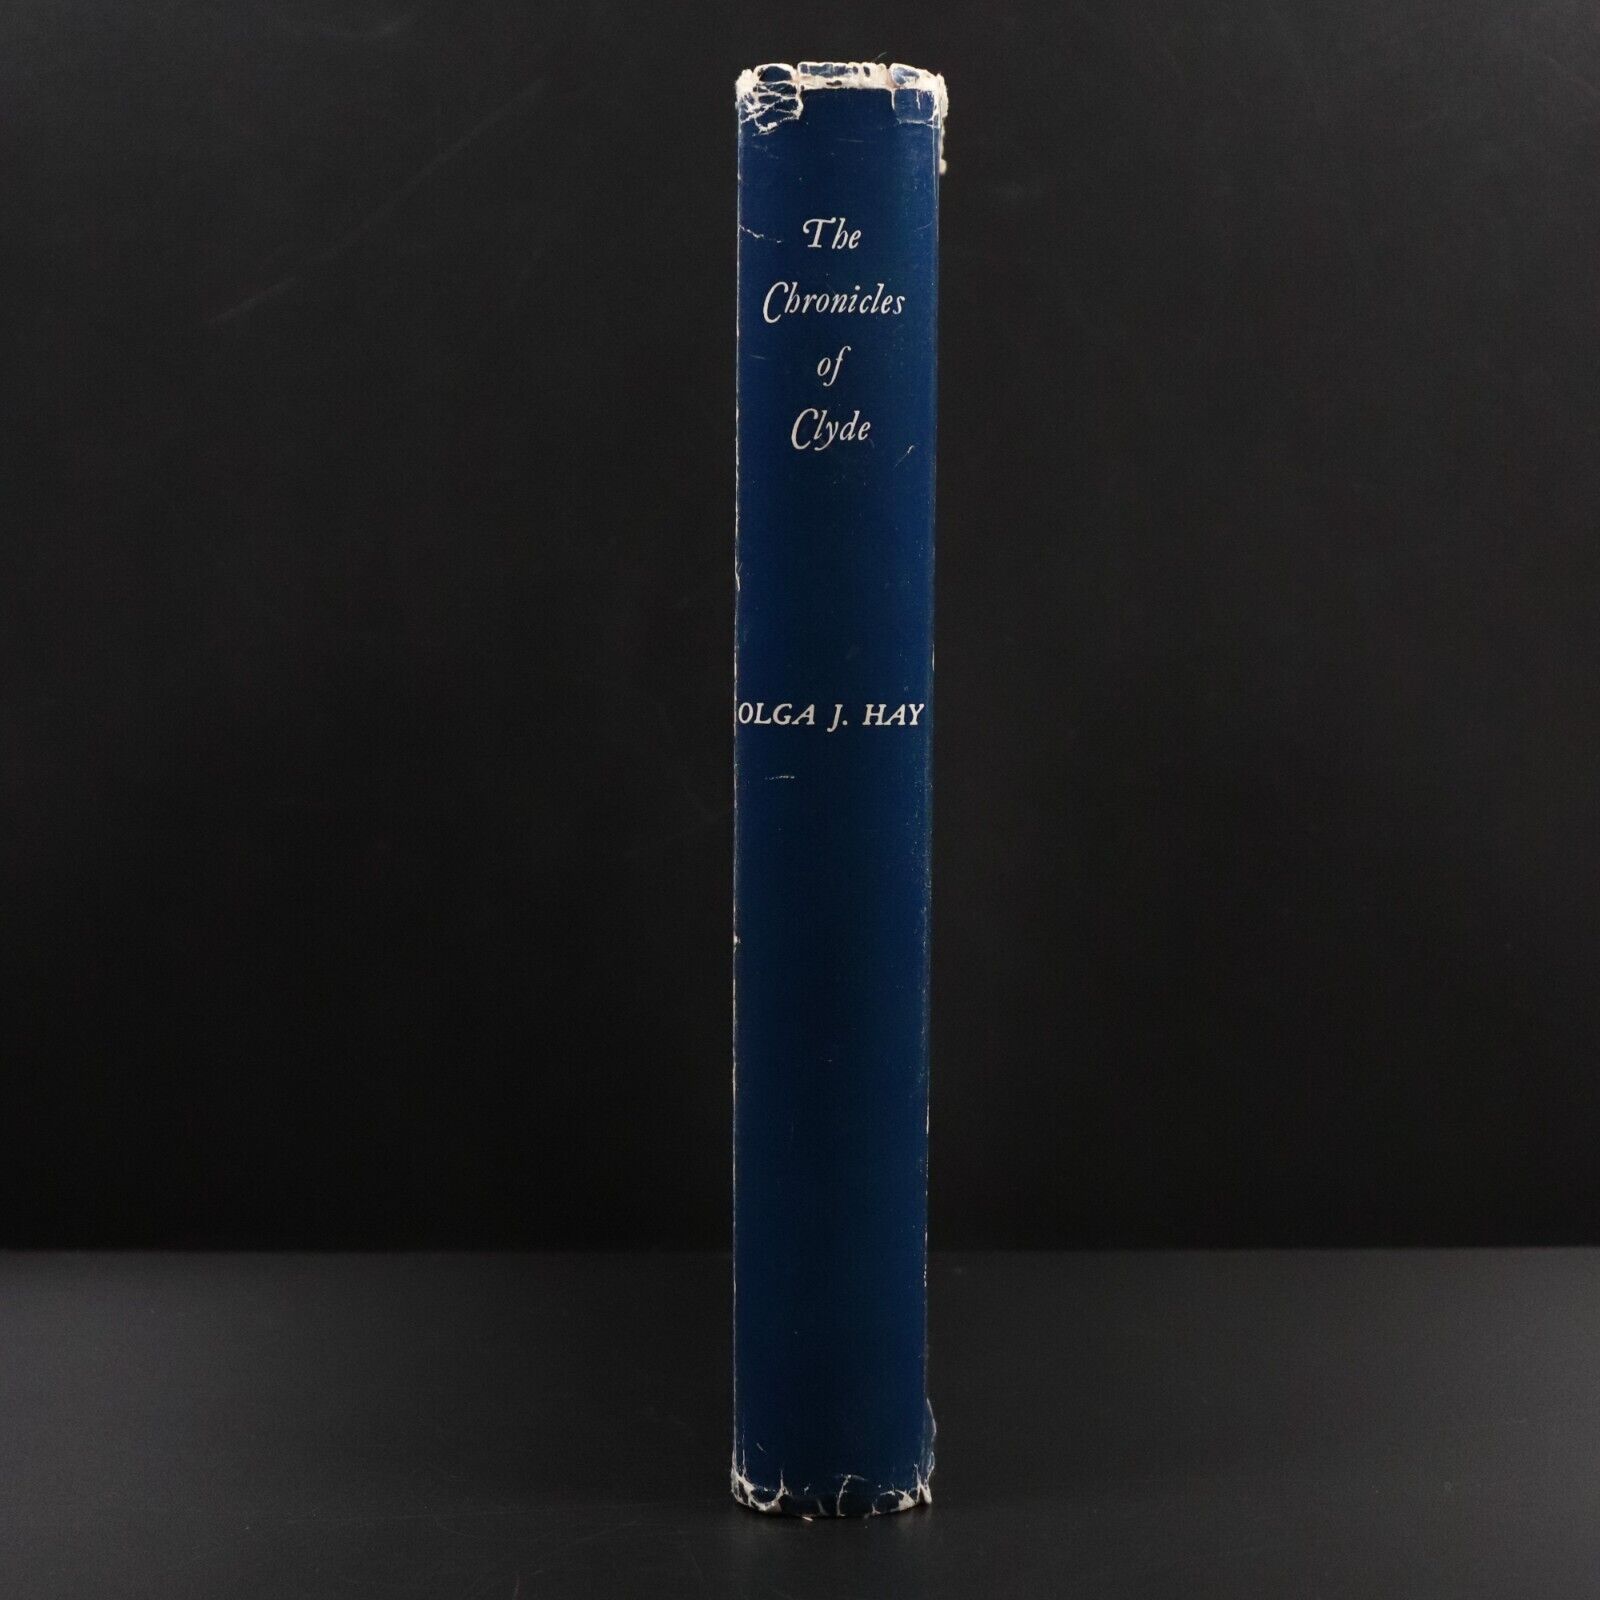 1966 The Chronicles of Clyde by Olga J. Hay Melbourne Australian History Book